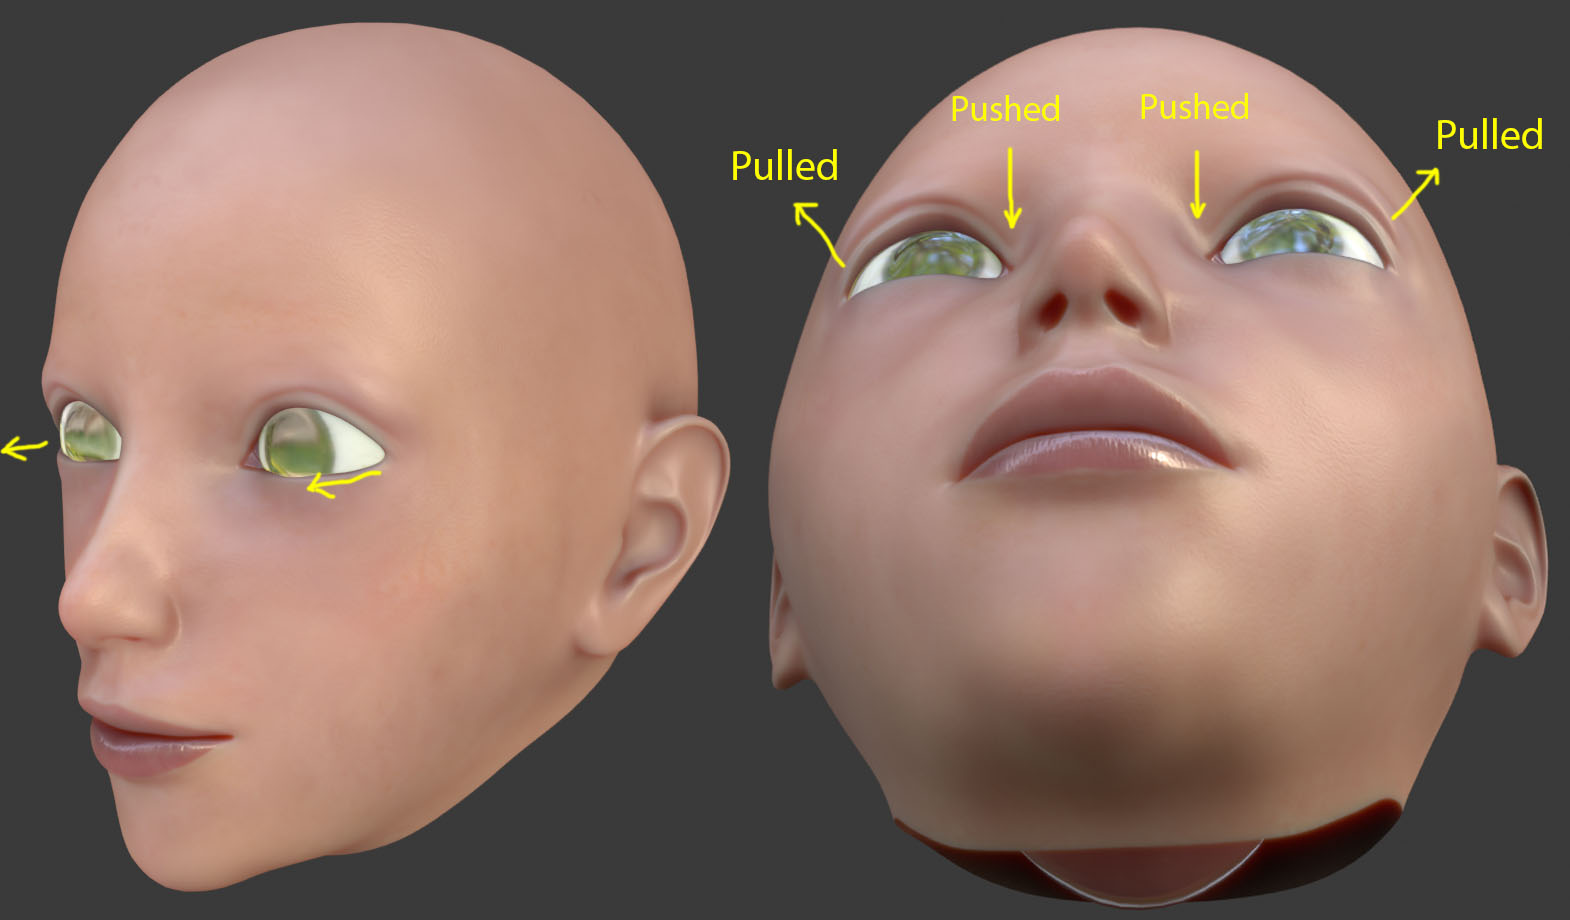 How to make anime eyes? They look like fetus eyes and not 100% female -  Works in Progress - Blender Artists Community